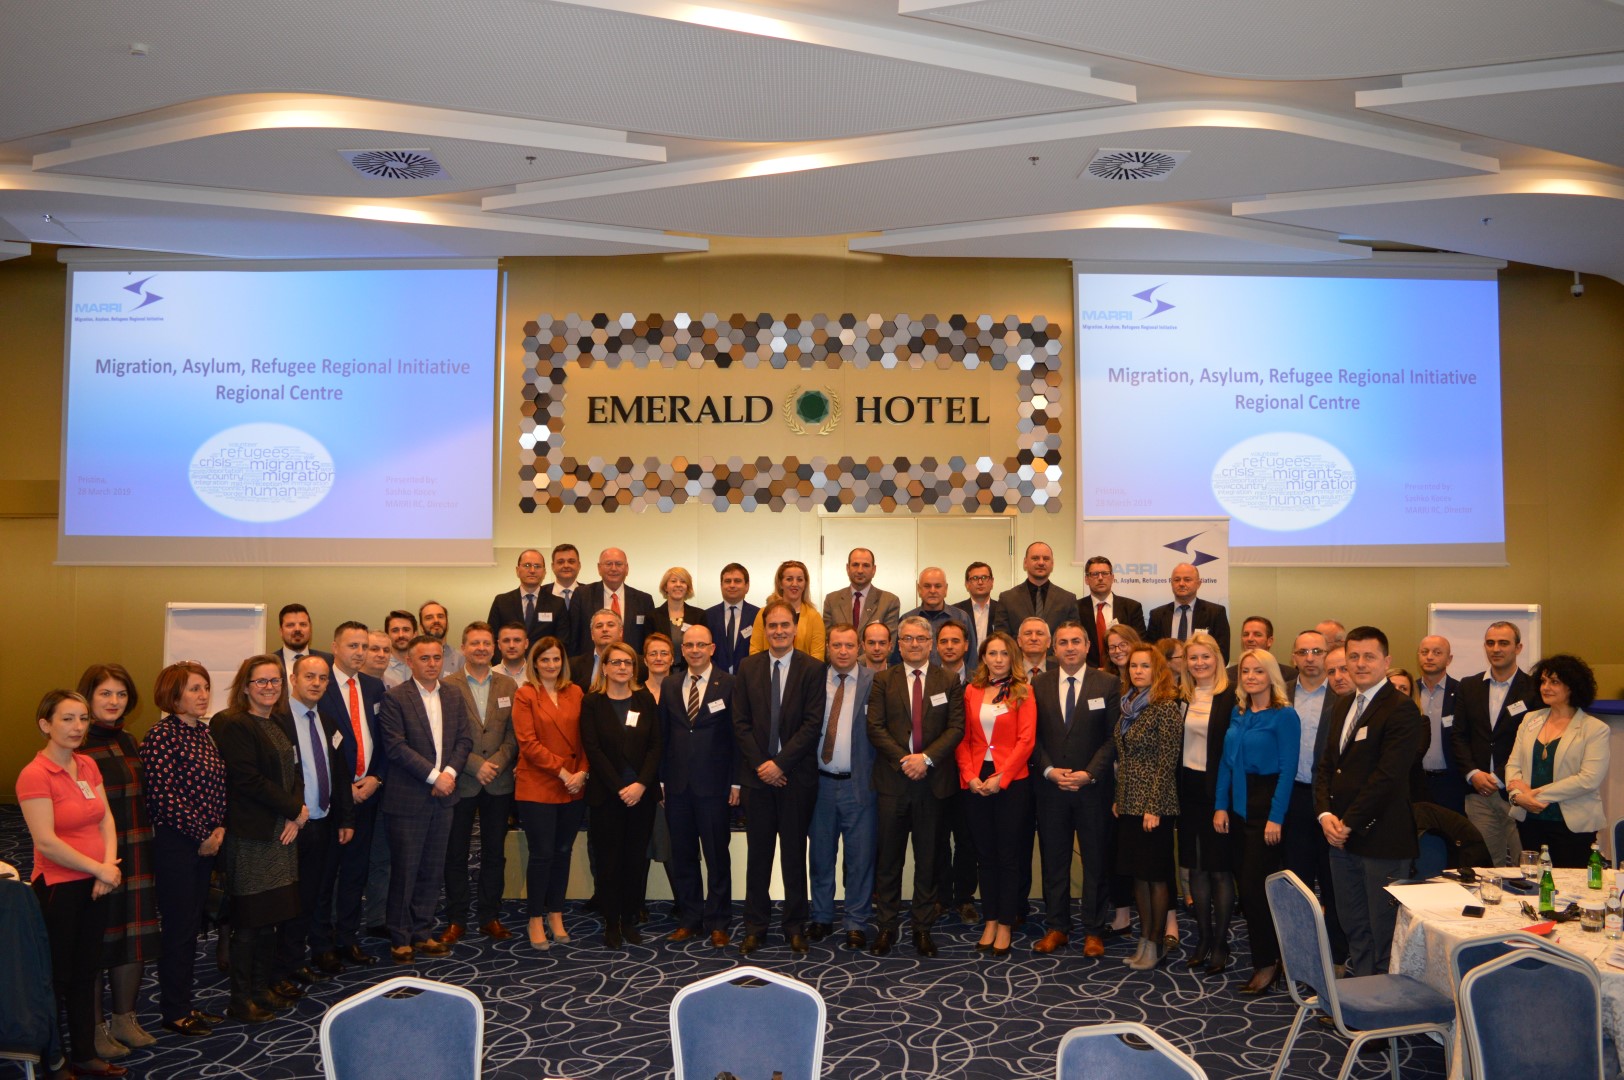 28 March 2019 – Workshop on “Strengthening regional dialogue and cooperation on migration” in Pristina